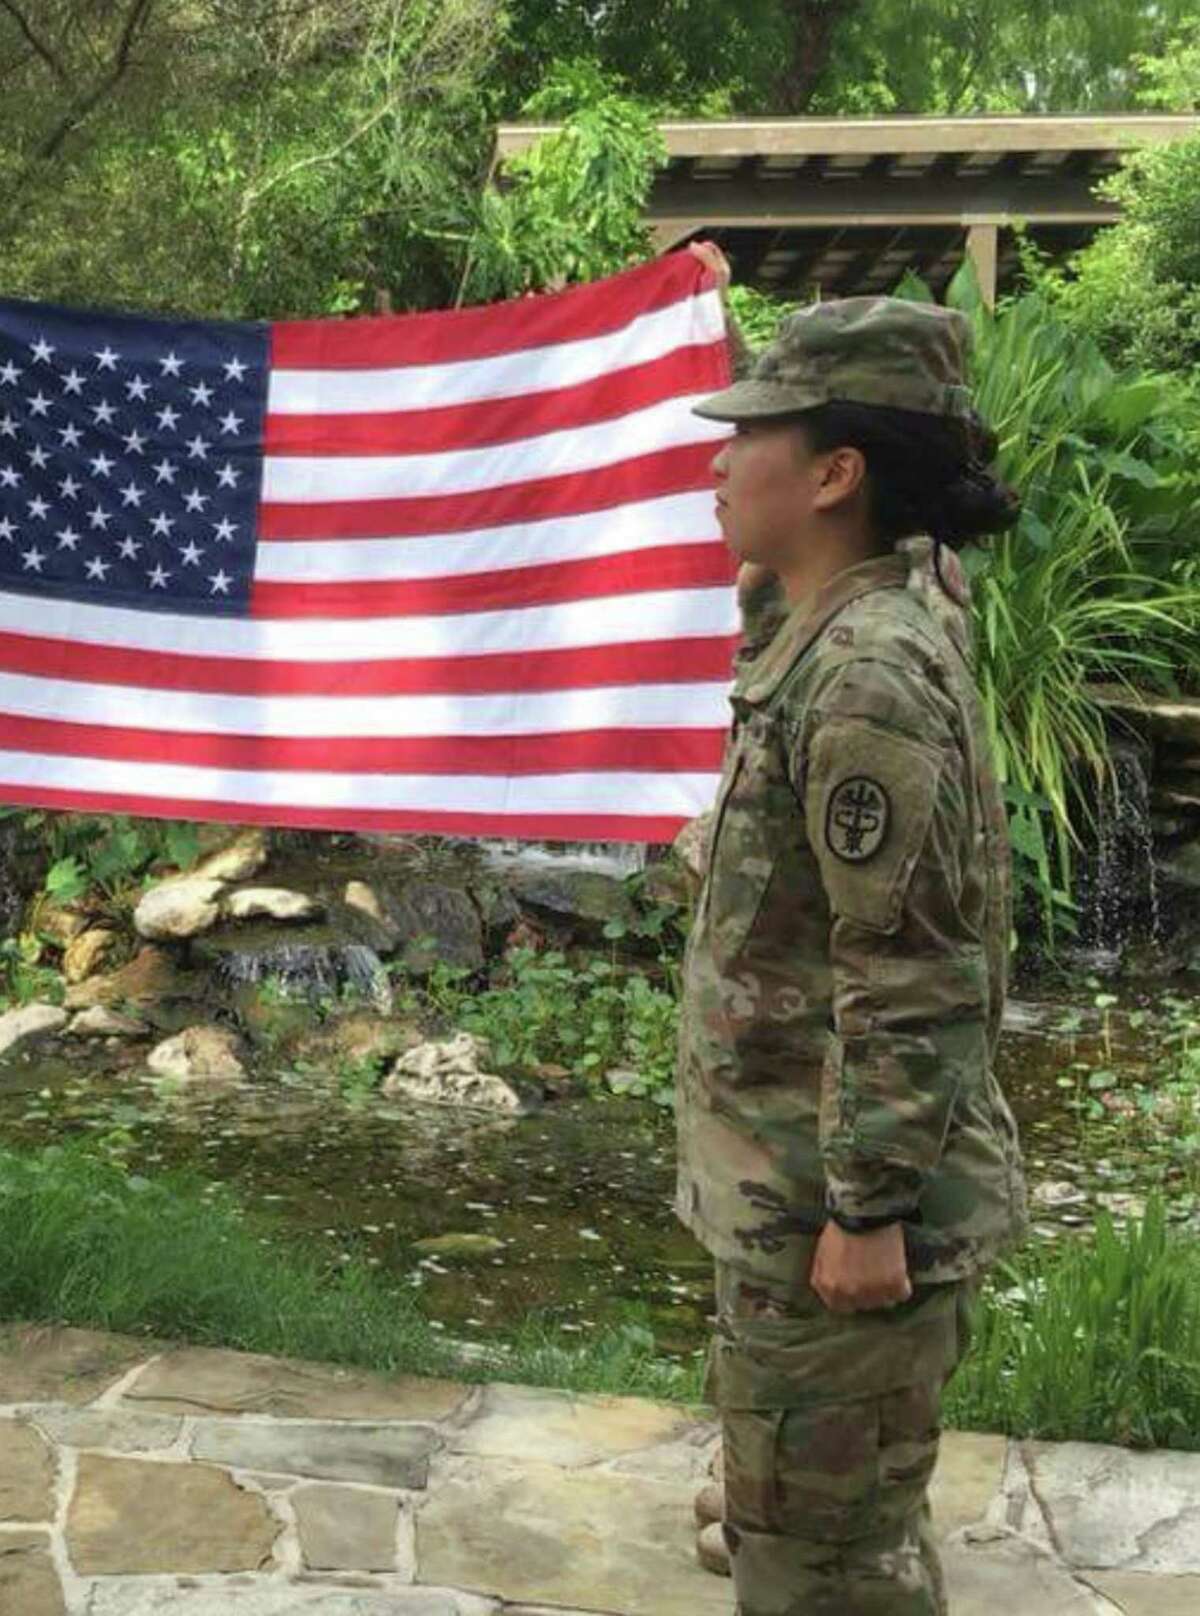 Spc. Yea Ji Sea, a combat medic at Joint Base San Antonio-Fort Sam Houston, re-enlisted in the Army last December after serving for four years. A Korean national who has sought U.S. citizenship, she learned Thursday she was discharged.